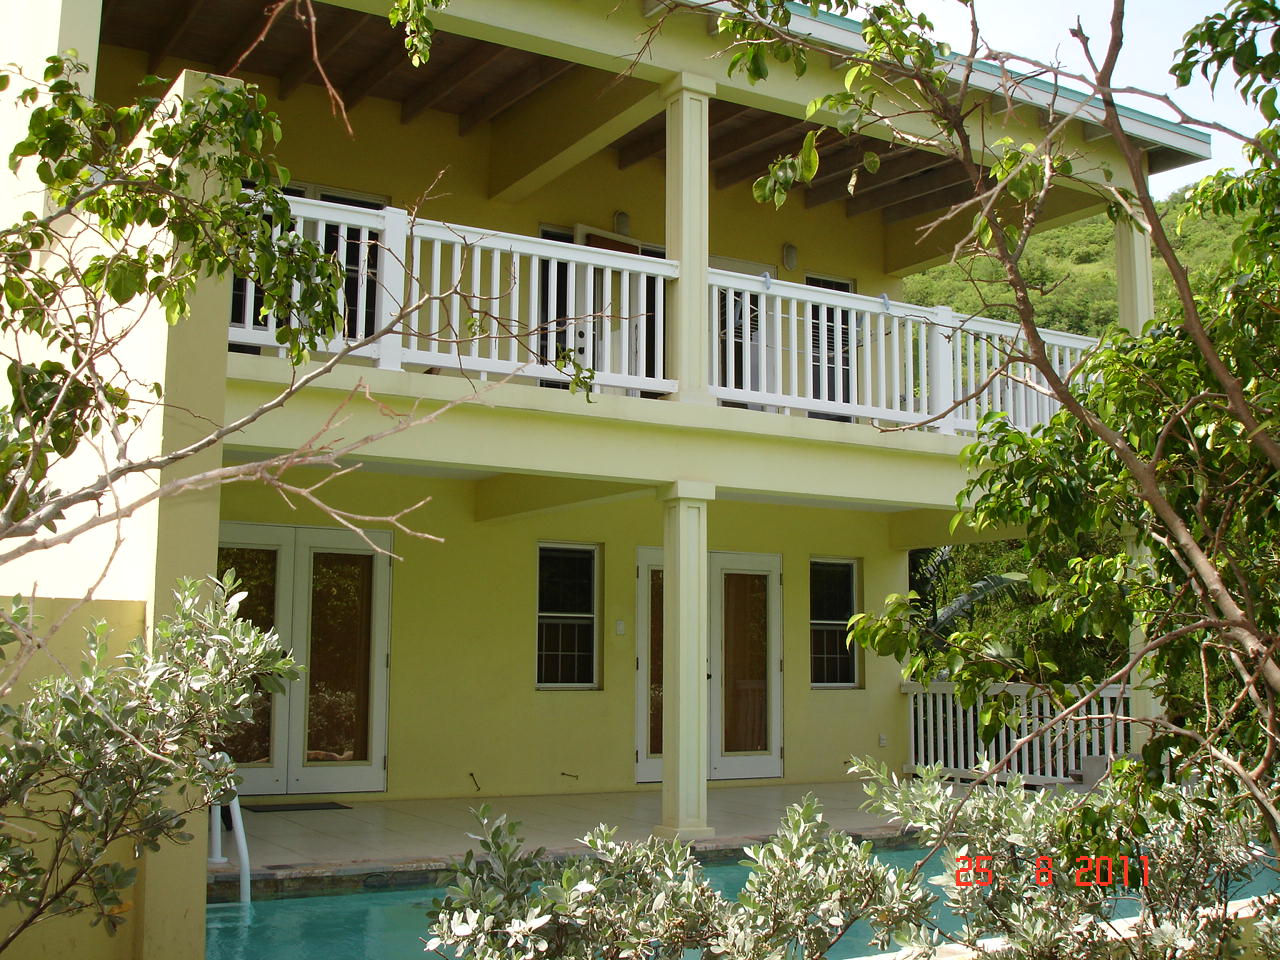 1 Bedroom Villa For Rent With Plunge Pool In Calypso Bay